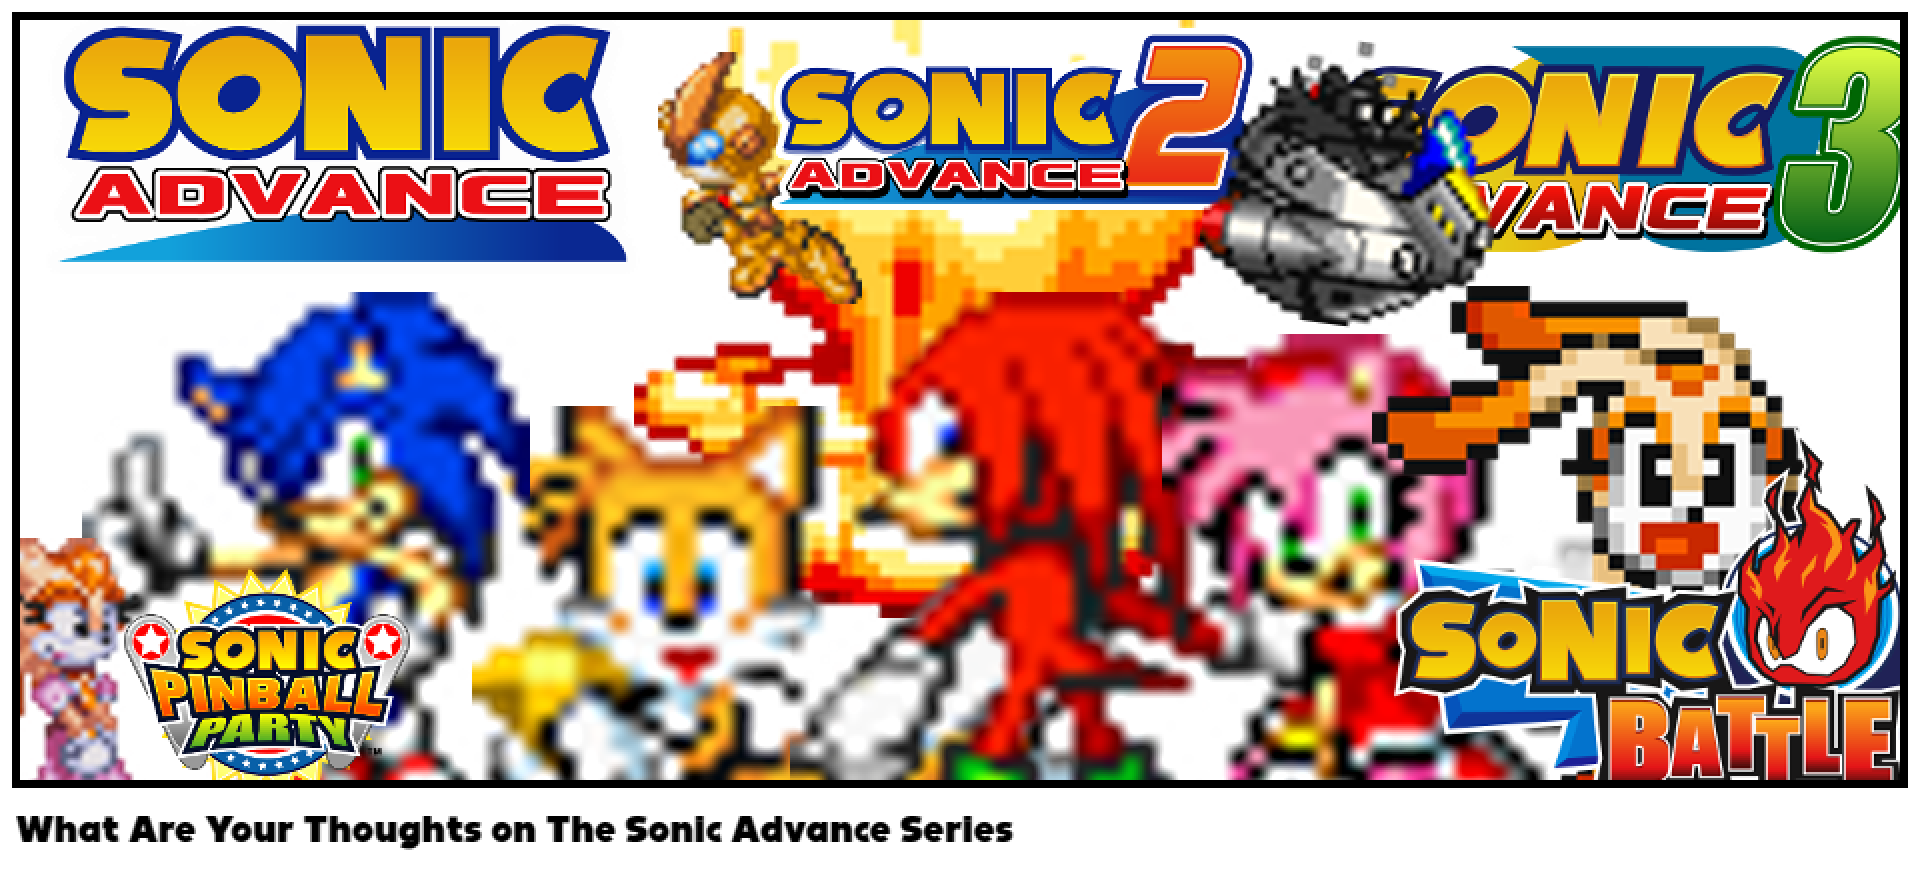 What Are Your Thoughts on The Sonic Advance Series